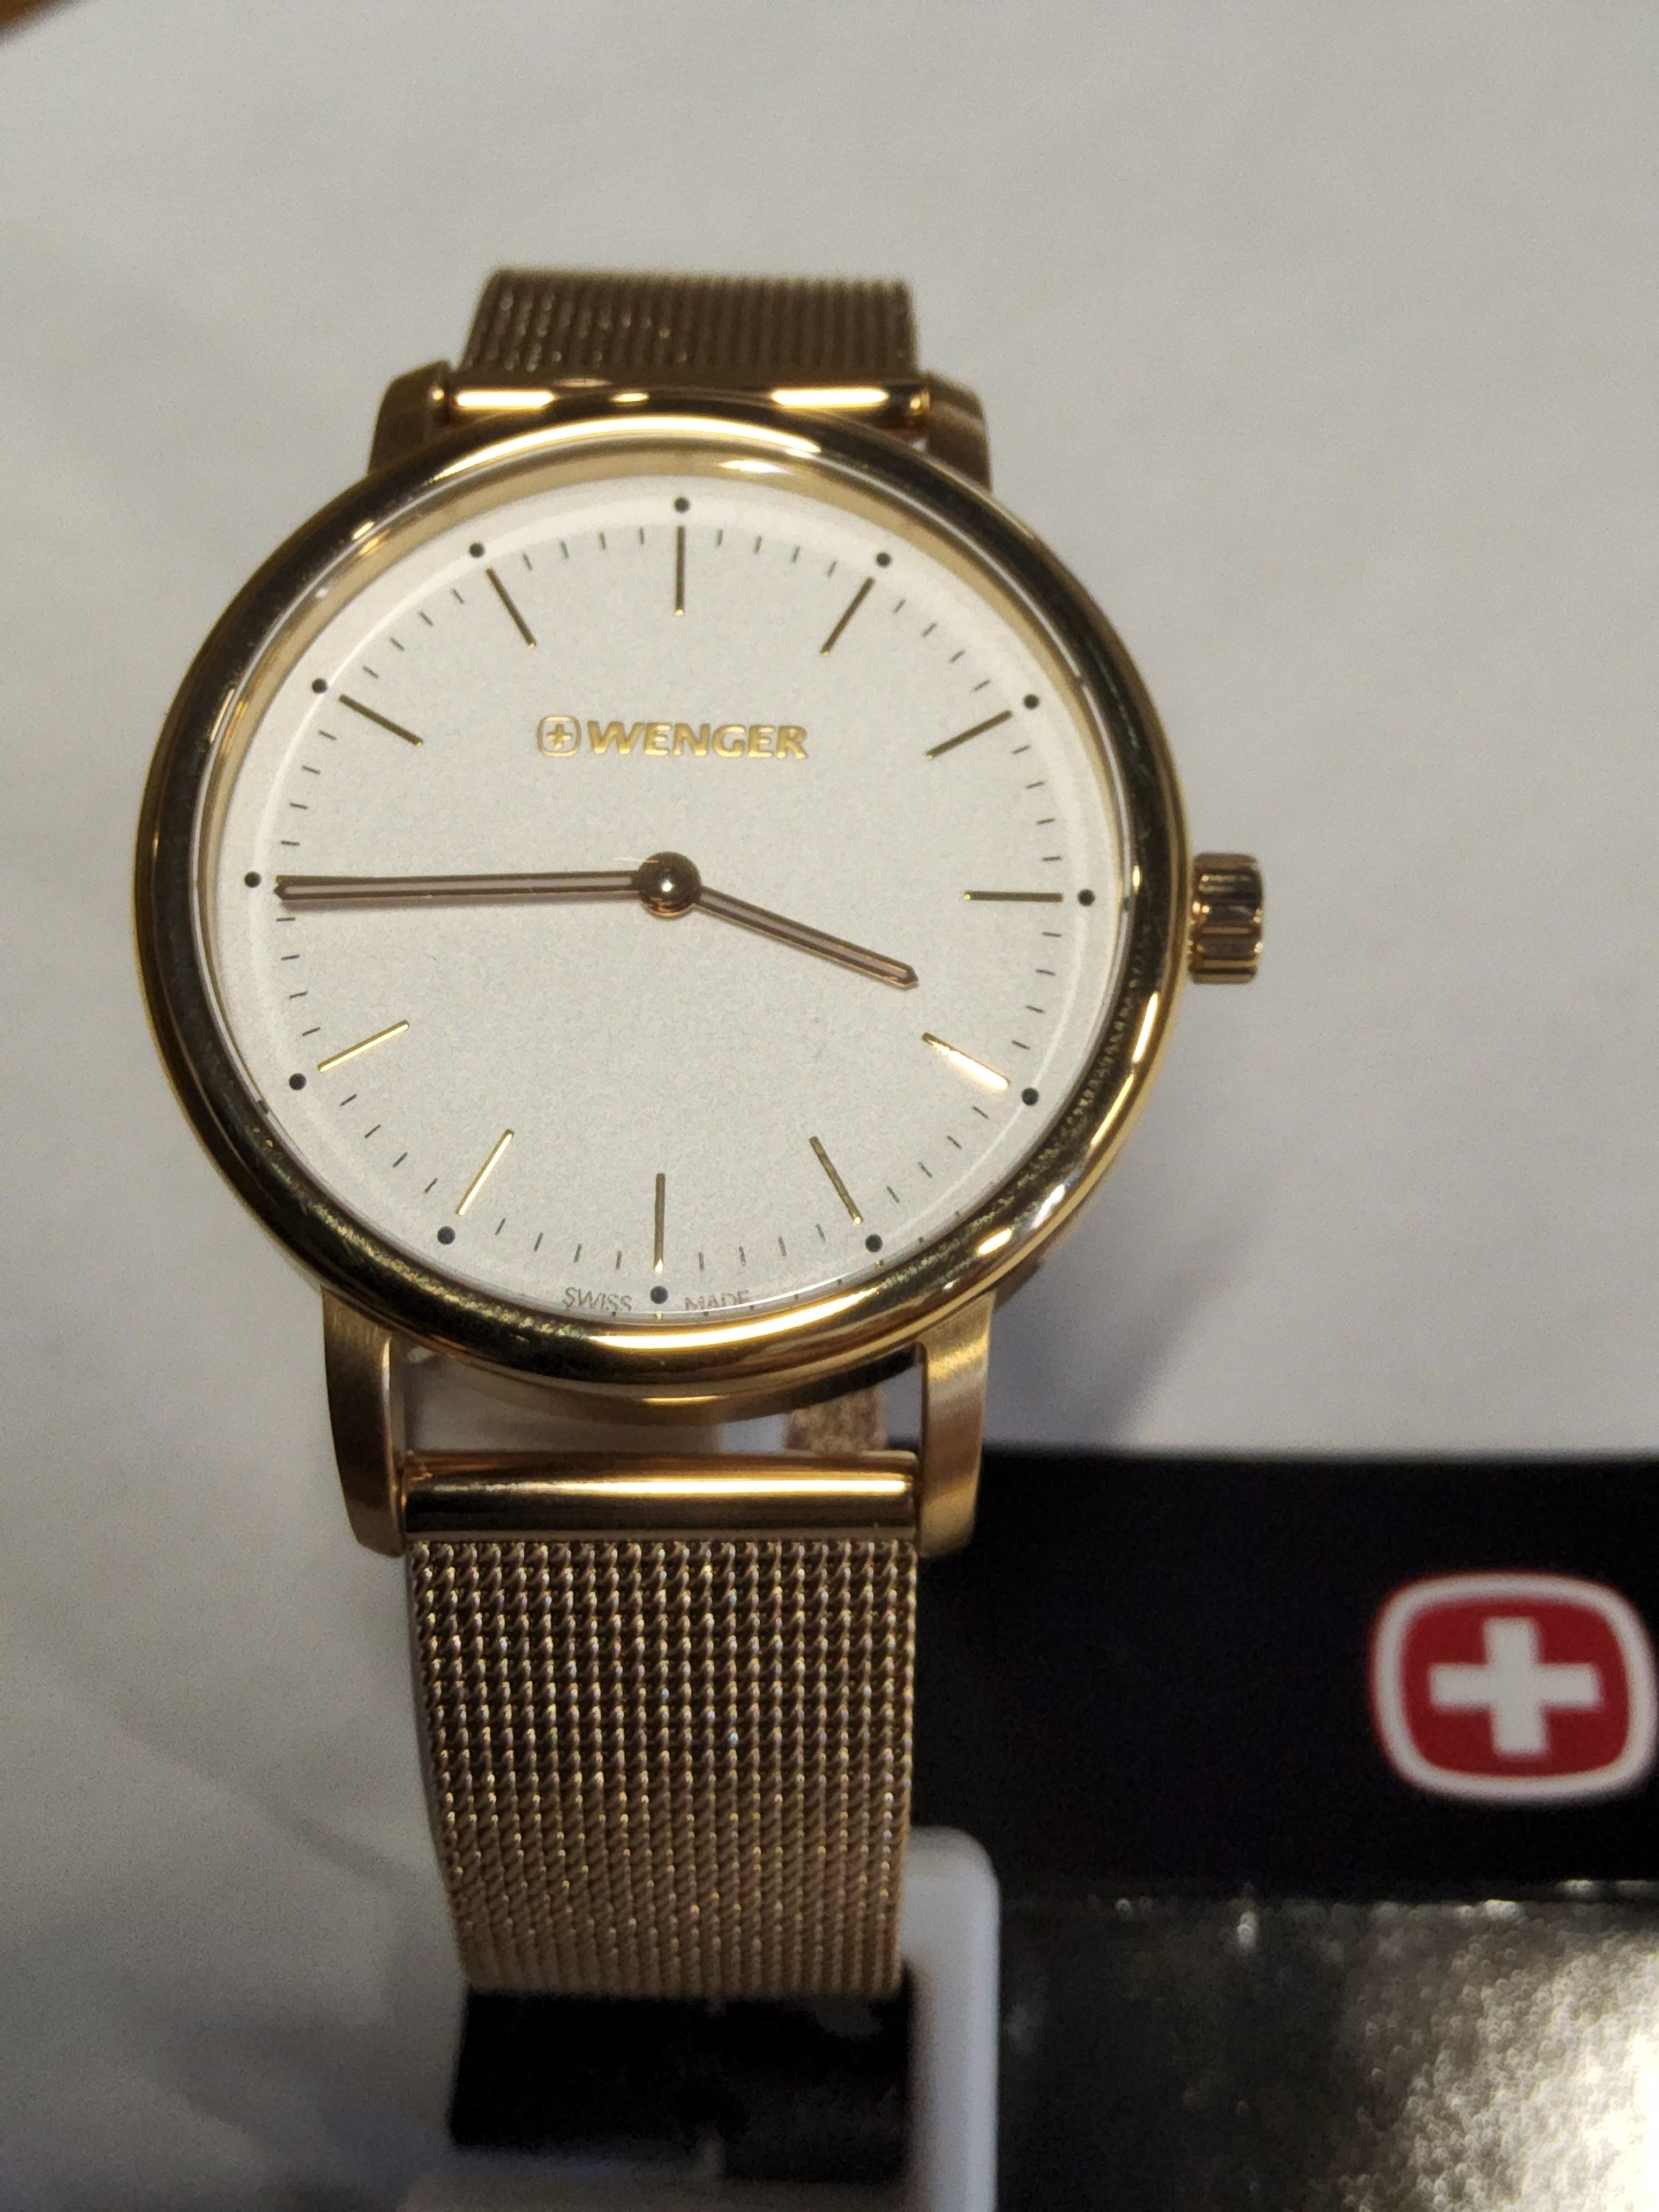 Wenger - Swiss Military Watch 01.1721.113